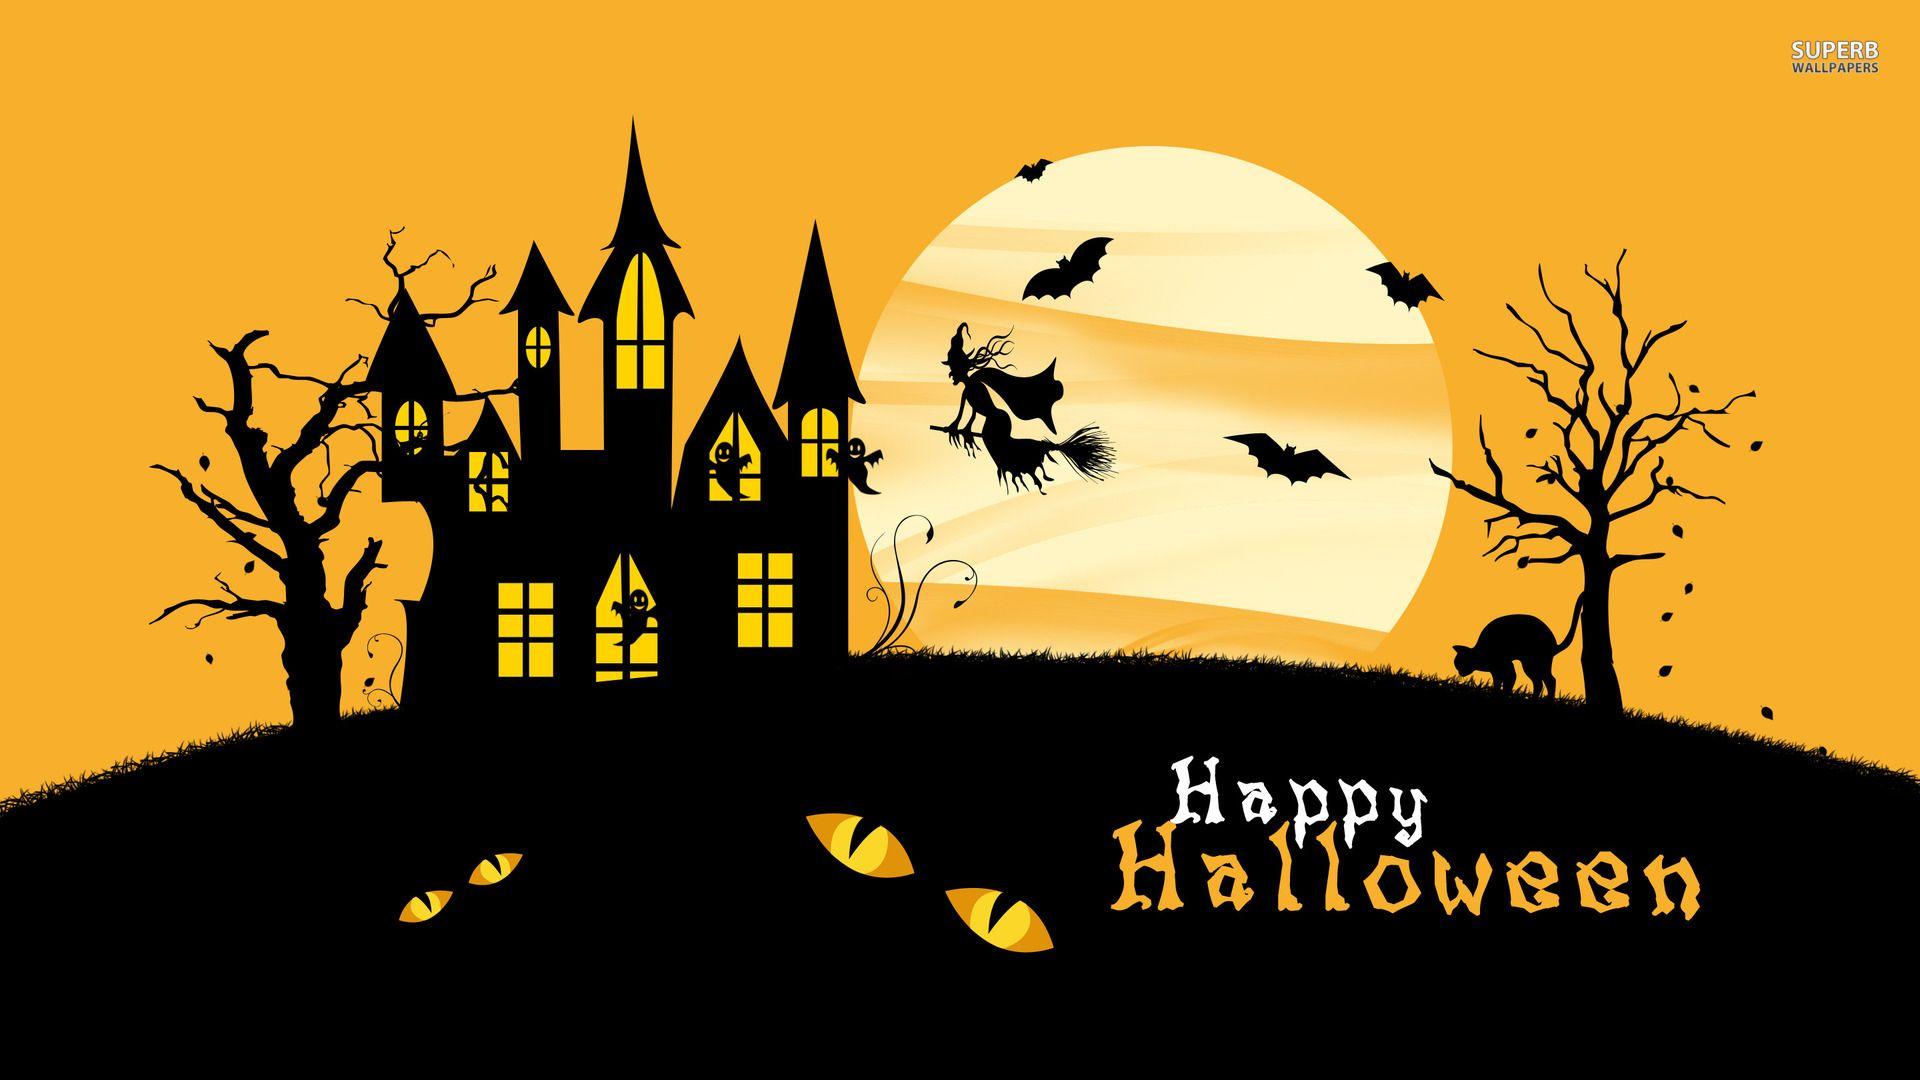 Happy Halloween Picture, Pic 2017 to Draw & Color for Facebook